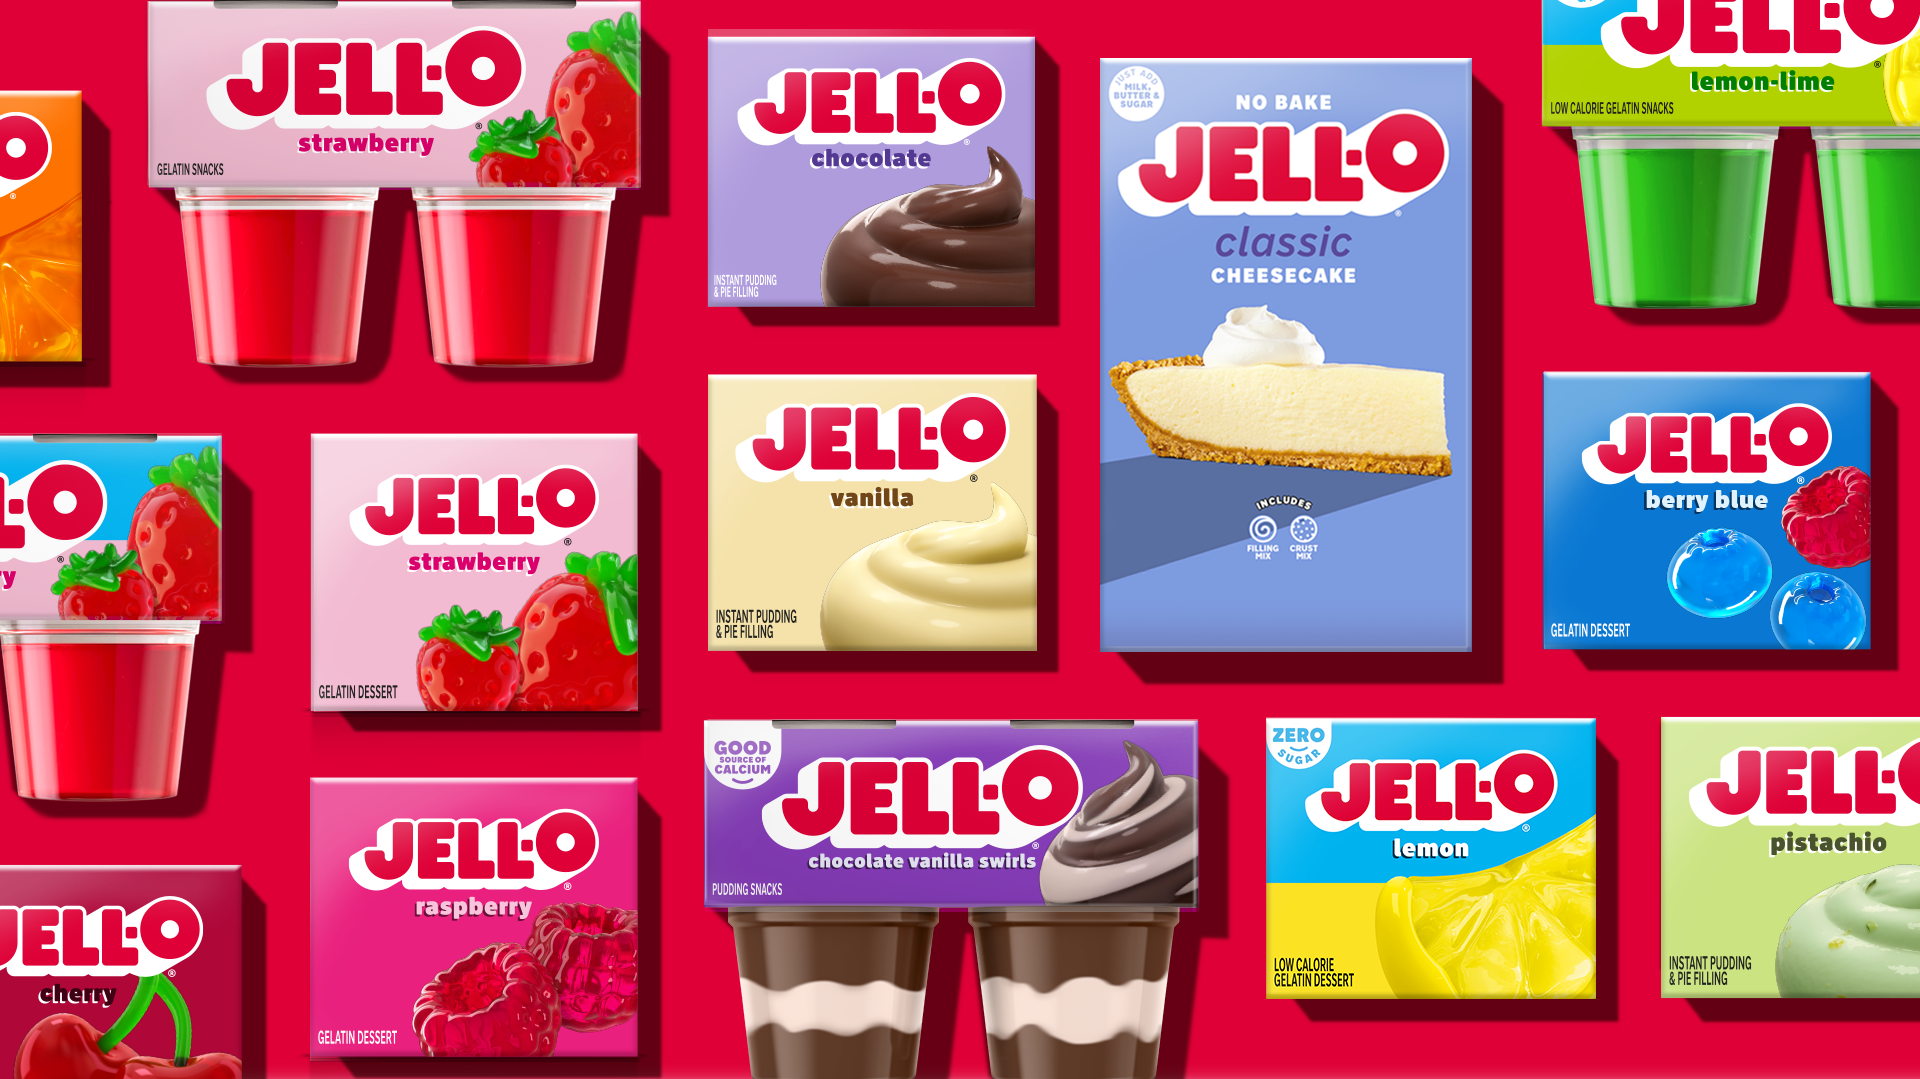 BrandOpus Gives Jell-O Its First Redesign In A Decade